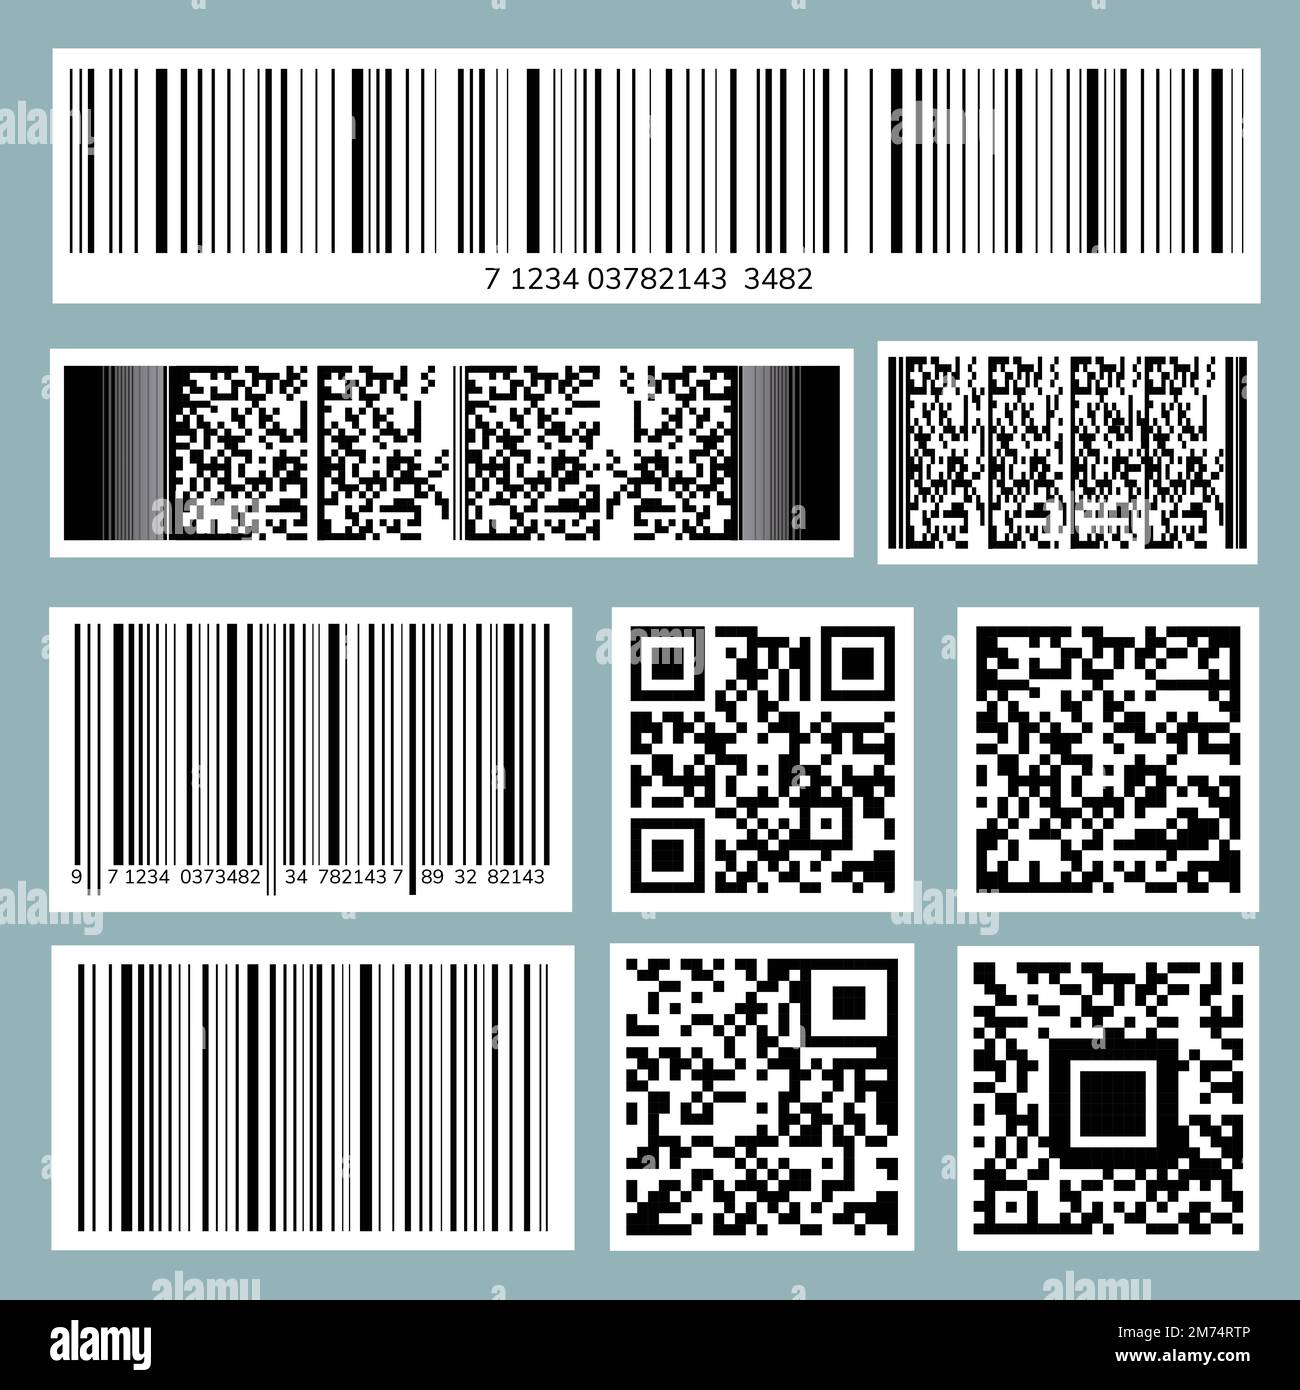 long barcode without numbers